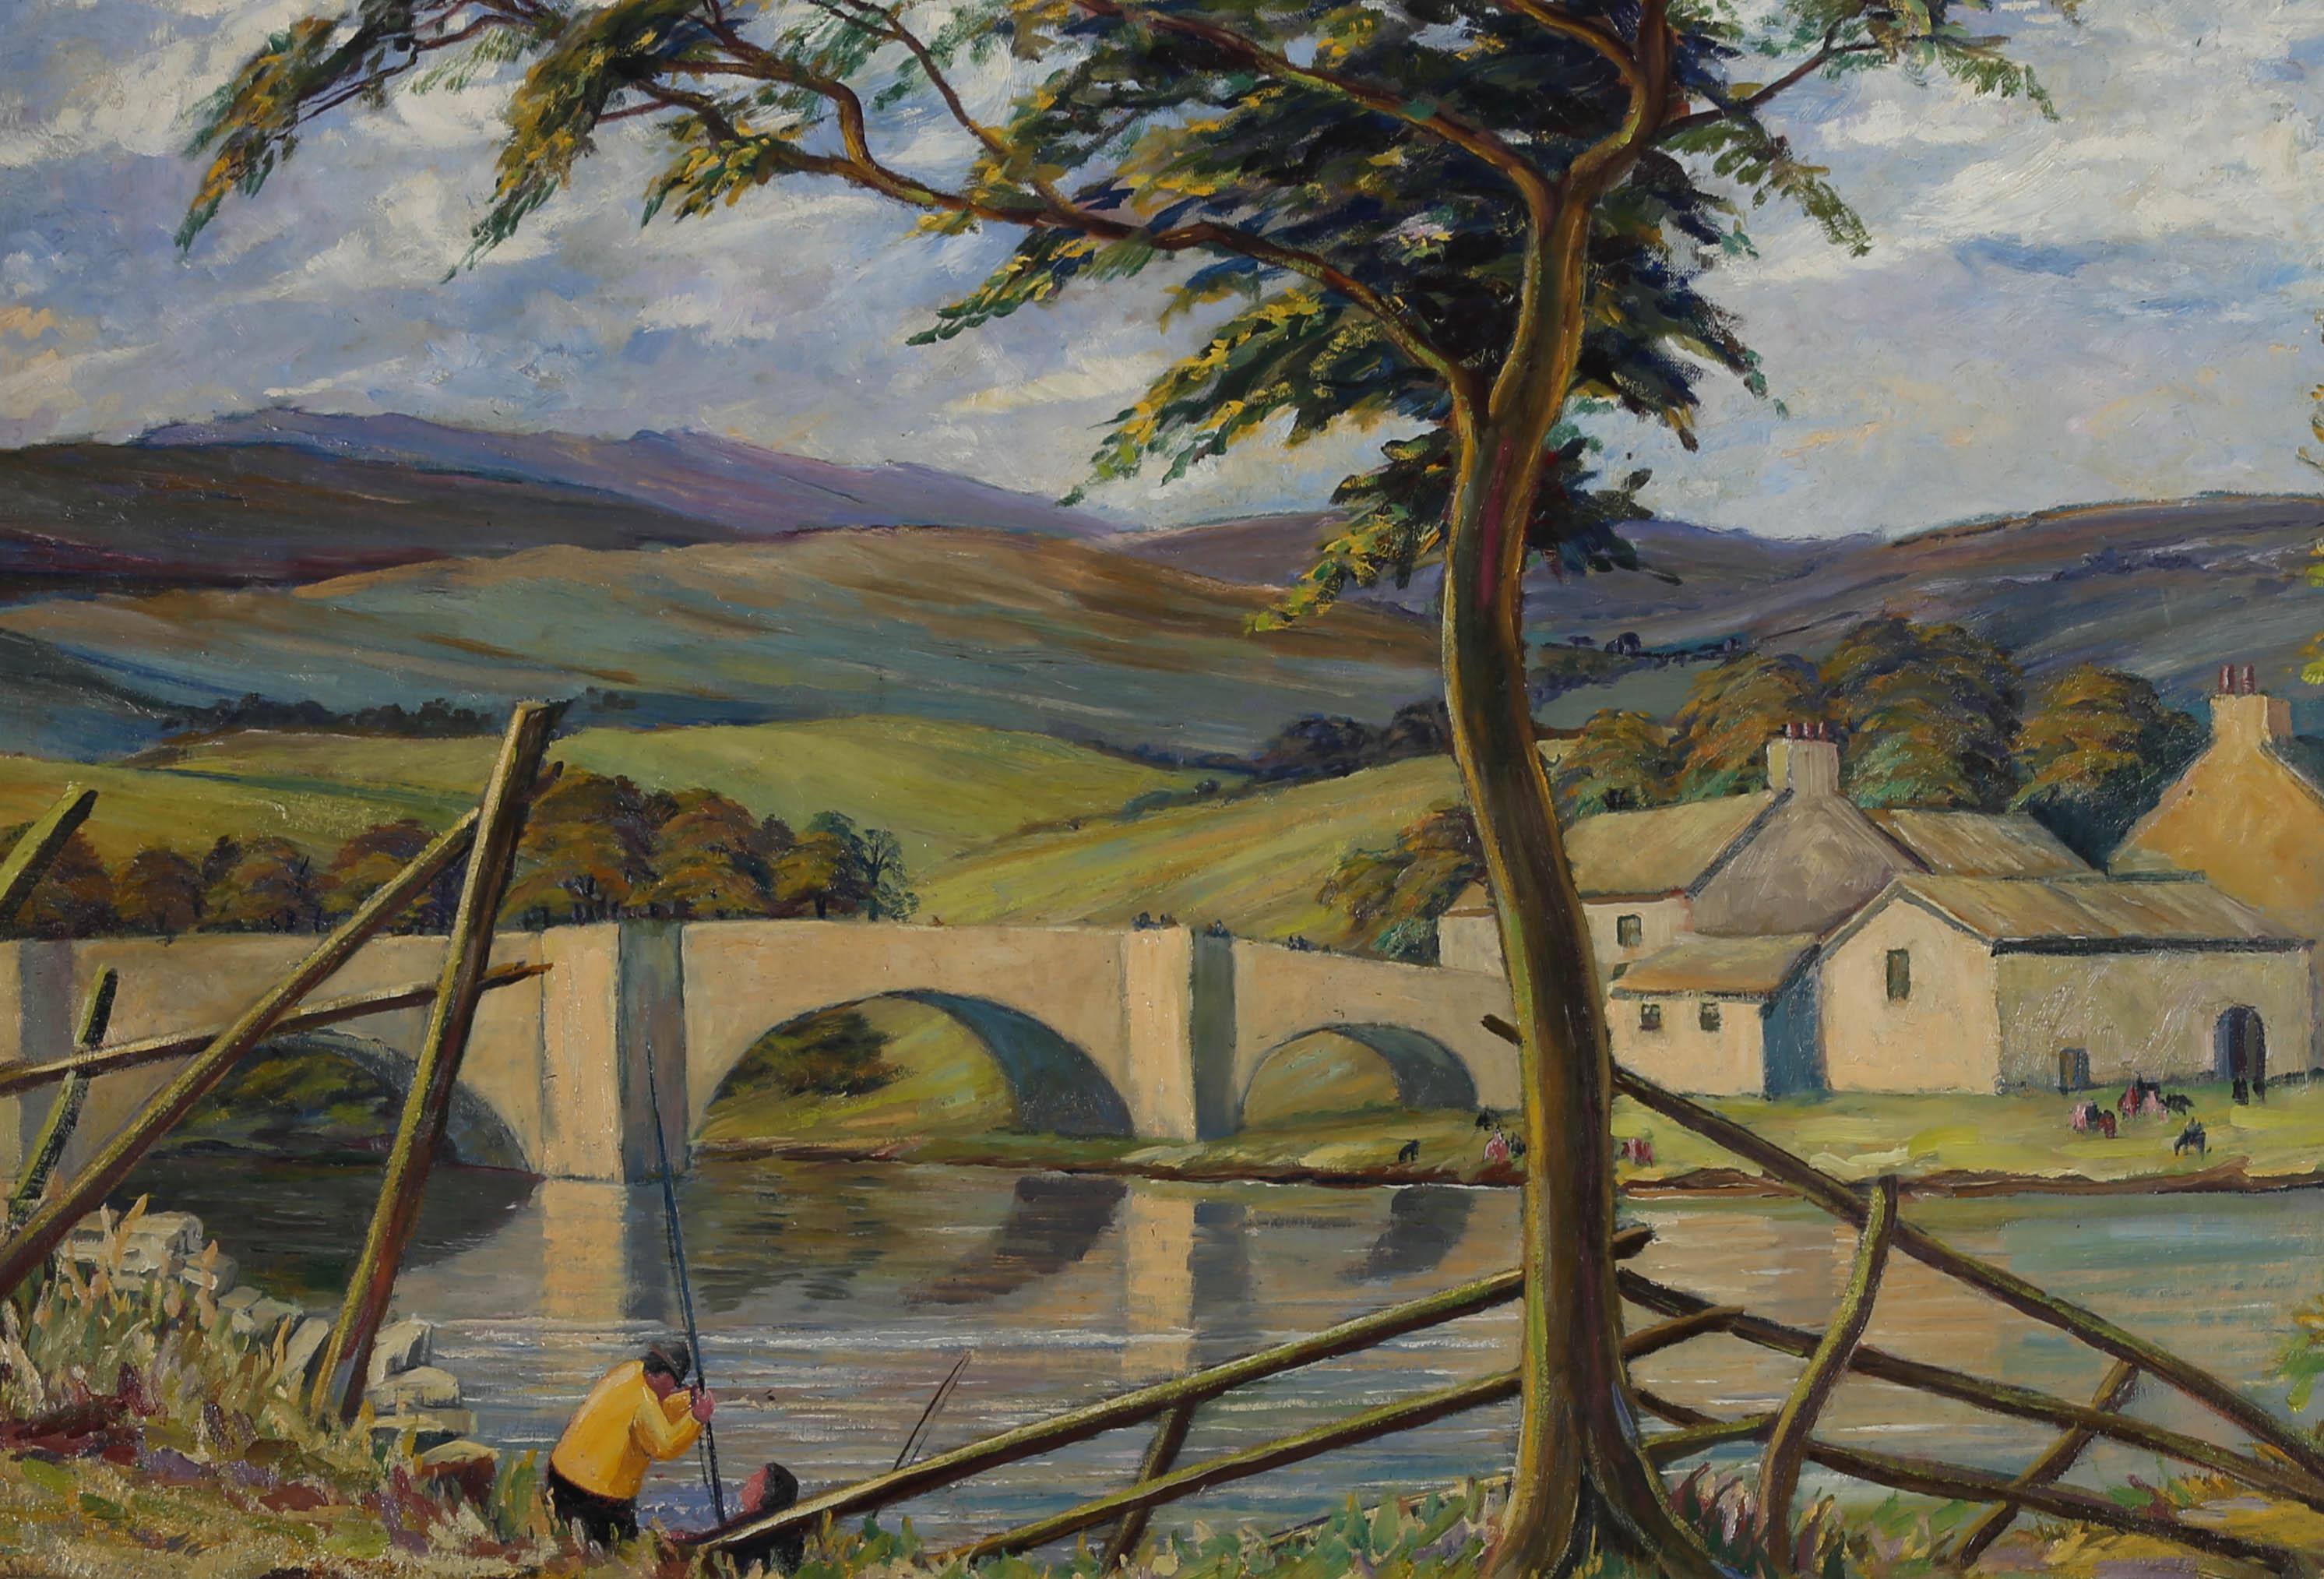 A striking oil landscape circa 1970s, showing a beautiful landscape with rolling hills and a bridge across a sparkling river under blue skies. Two figures can be seen fishing a the lower left bank, one in a jolly, vibrant yellow jumper. The artist